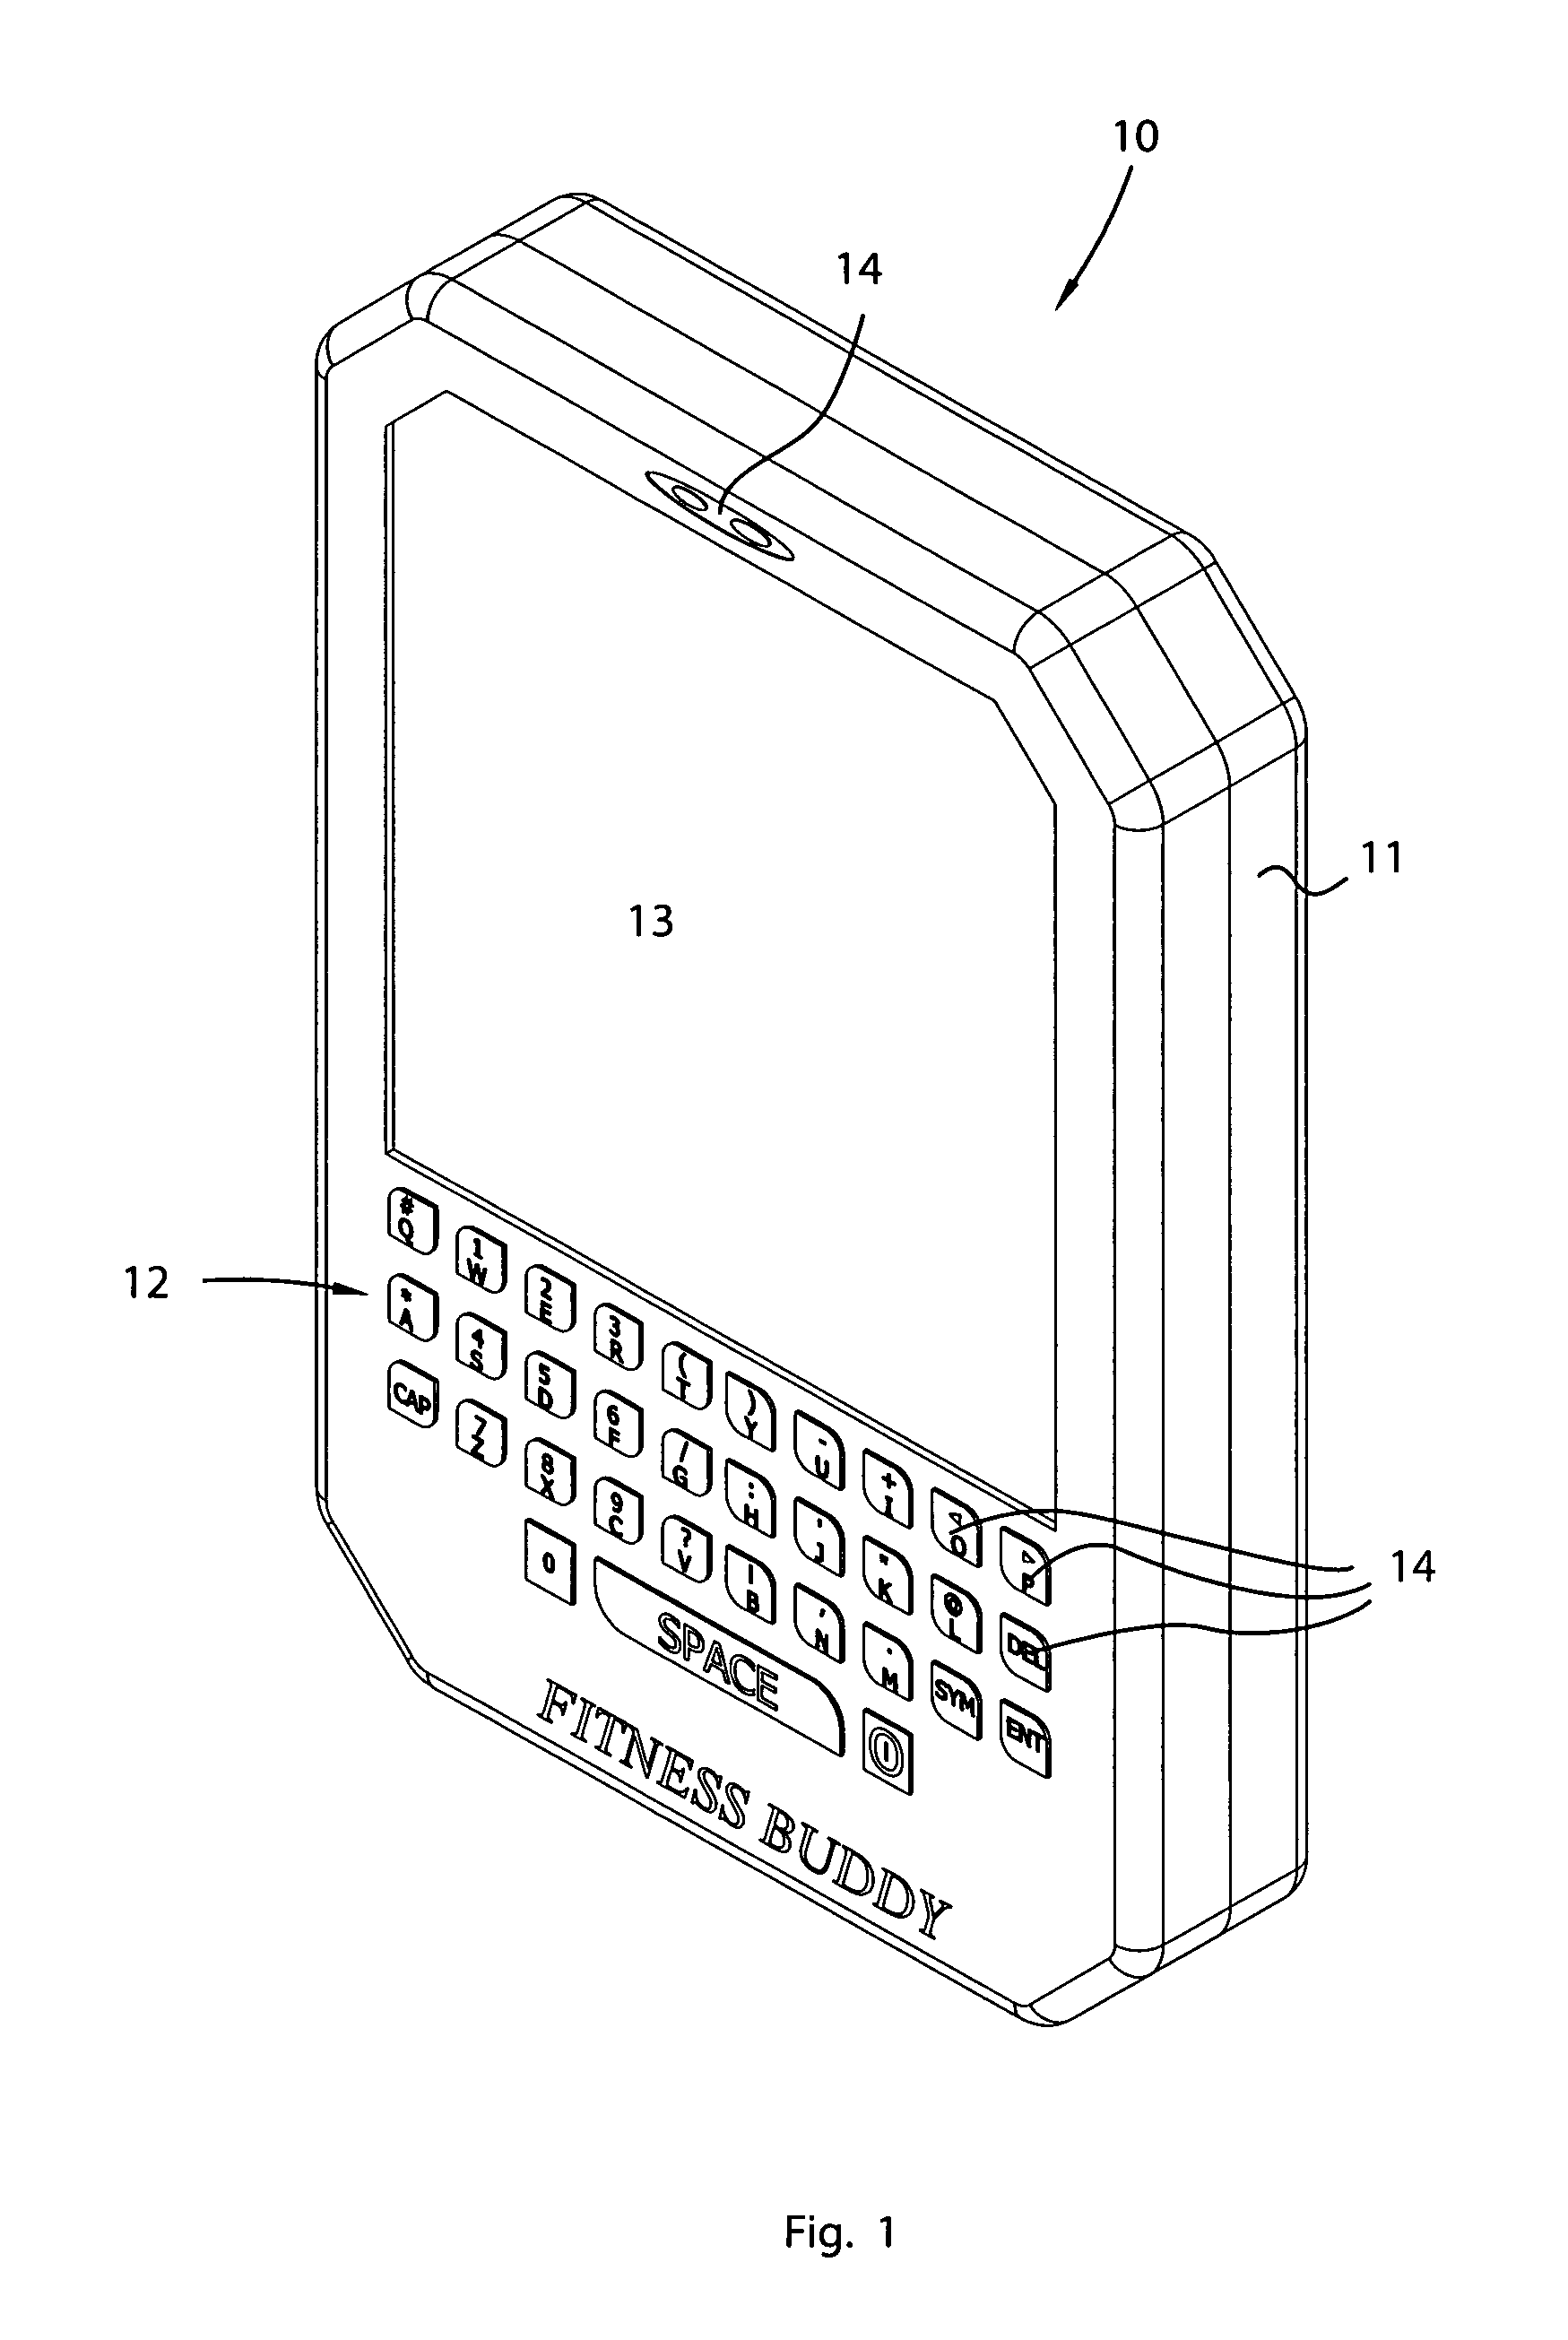 Device, method and computer program product for tracking and monitoring an exercise regimen